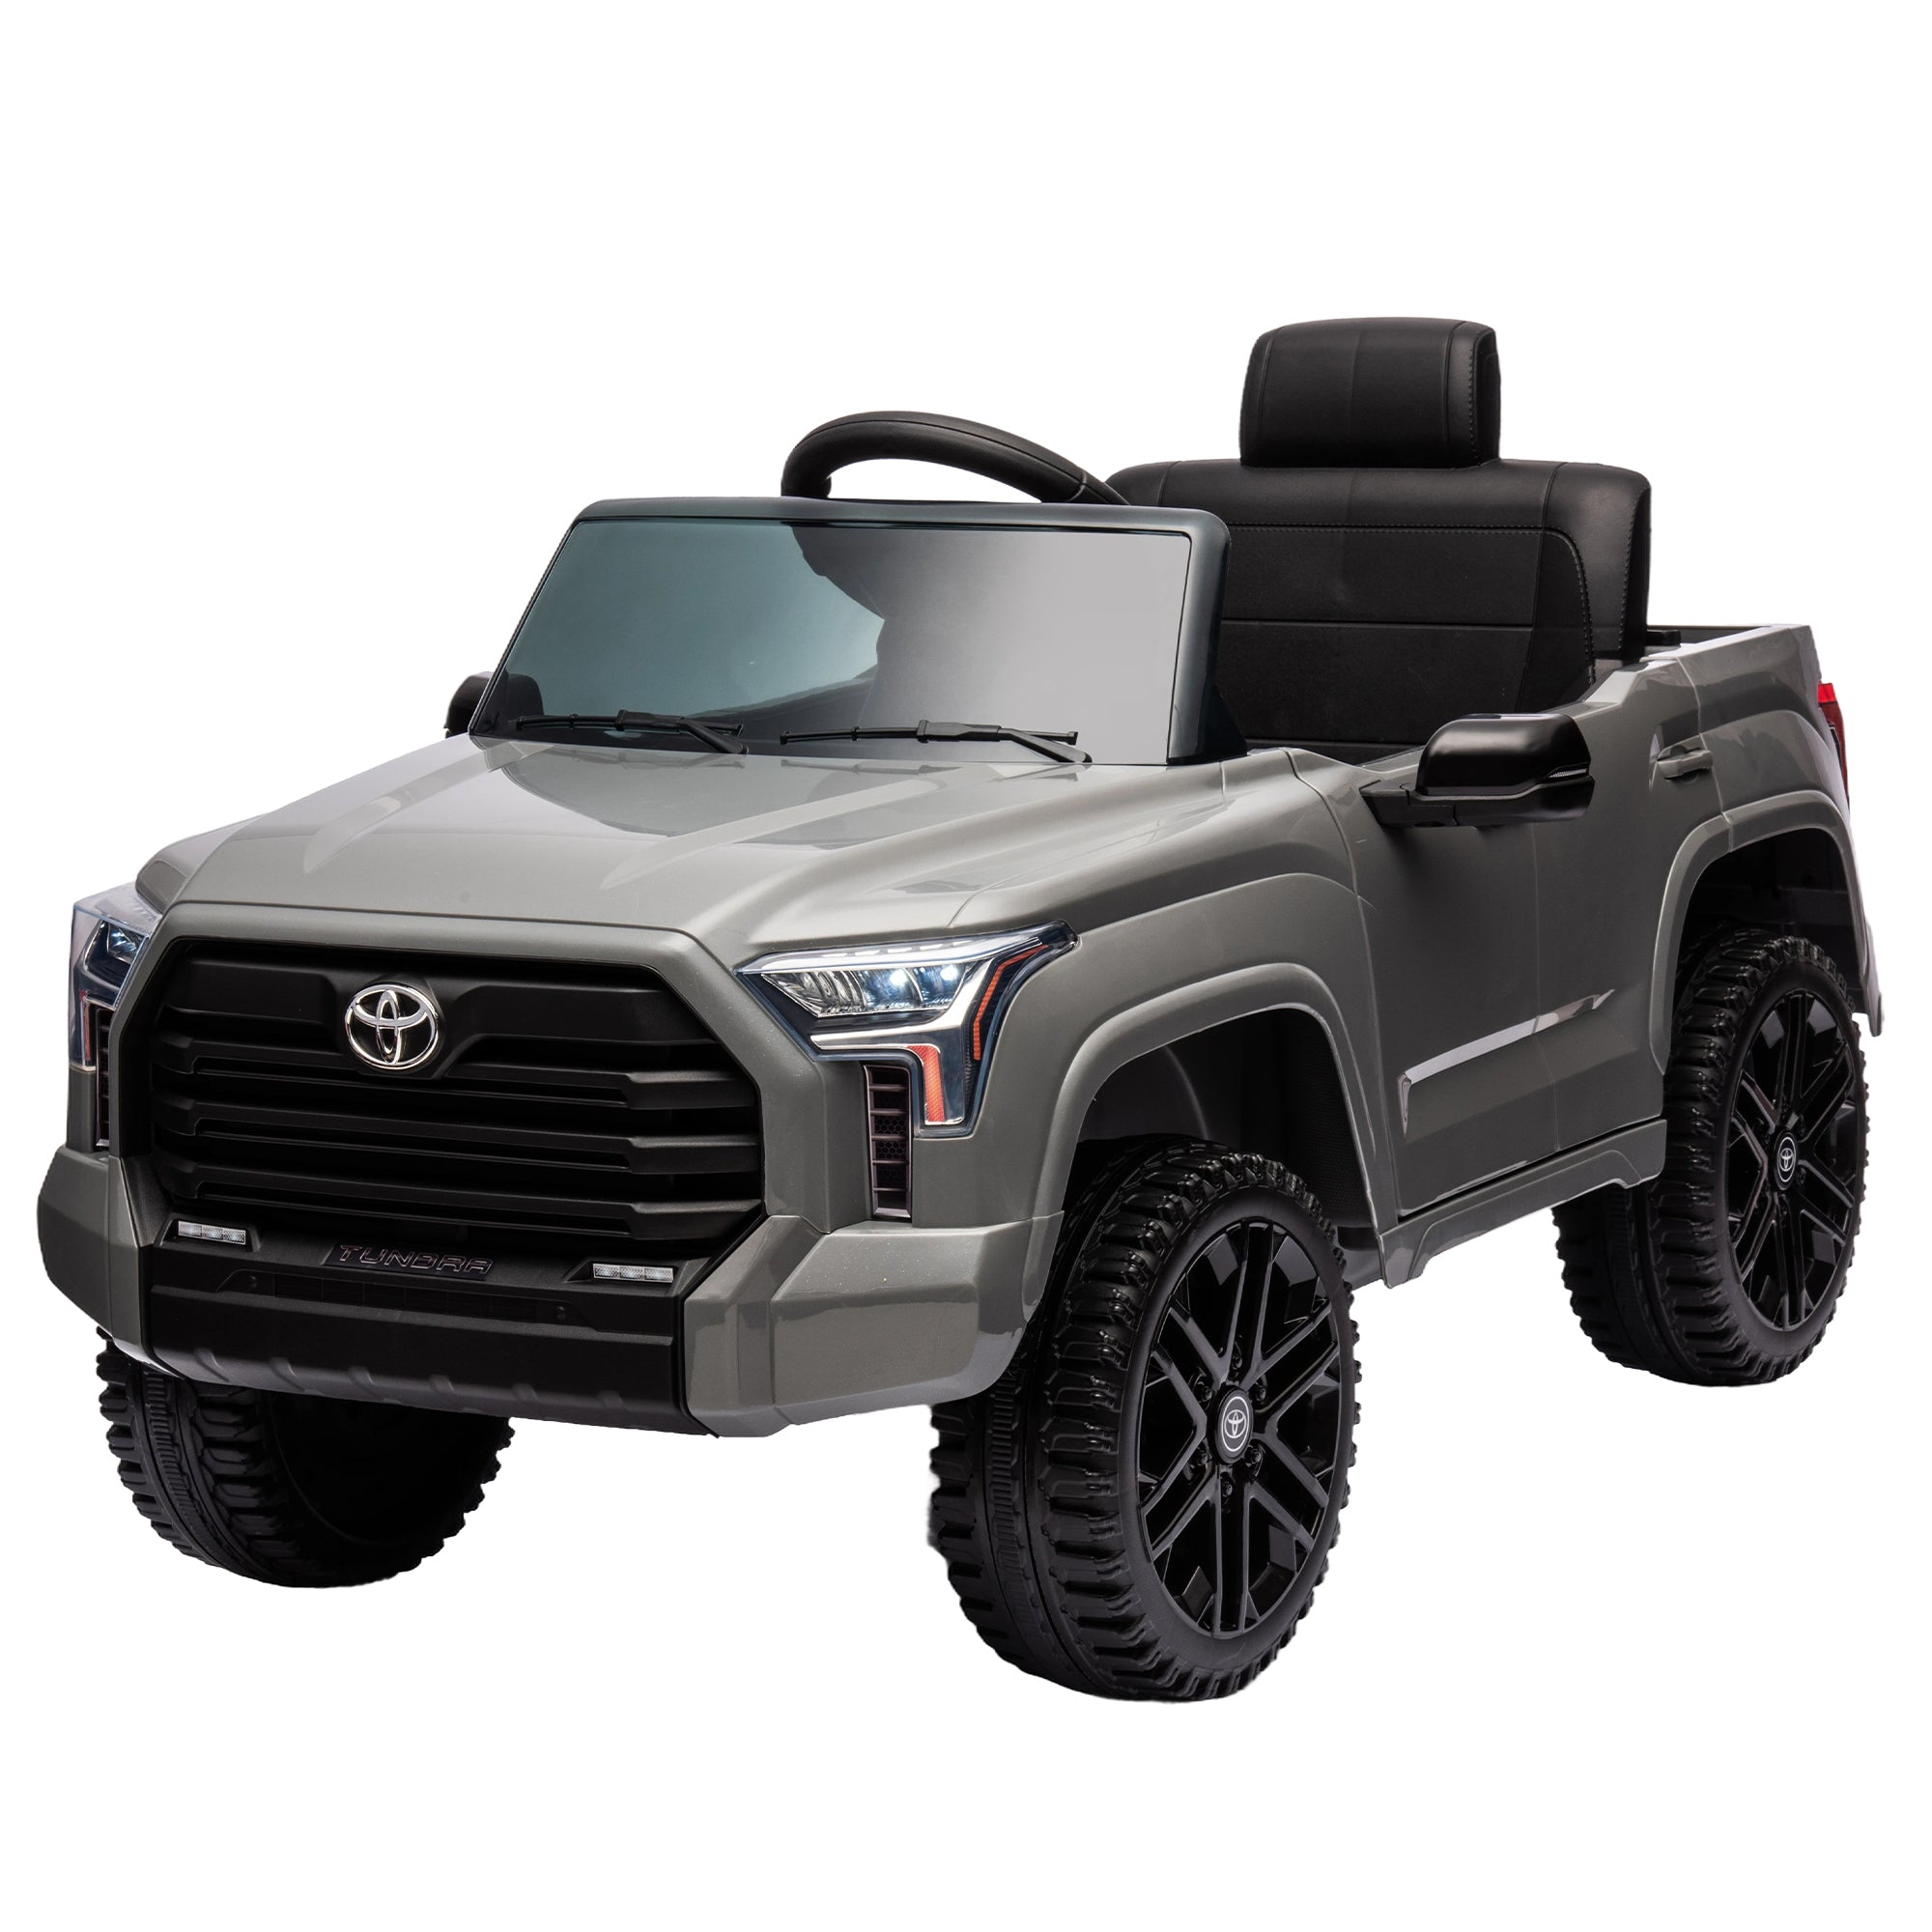 Officially Licensed Toyota Tundra Pickup,electric grey-plastic